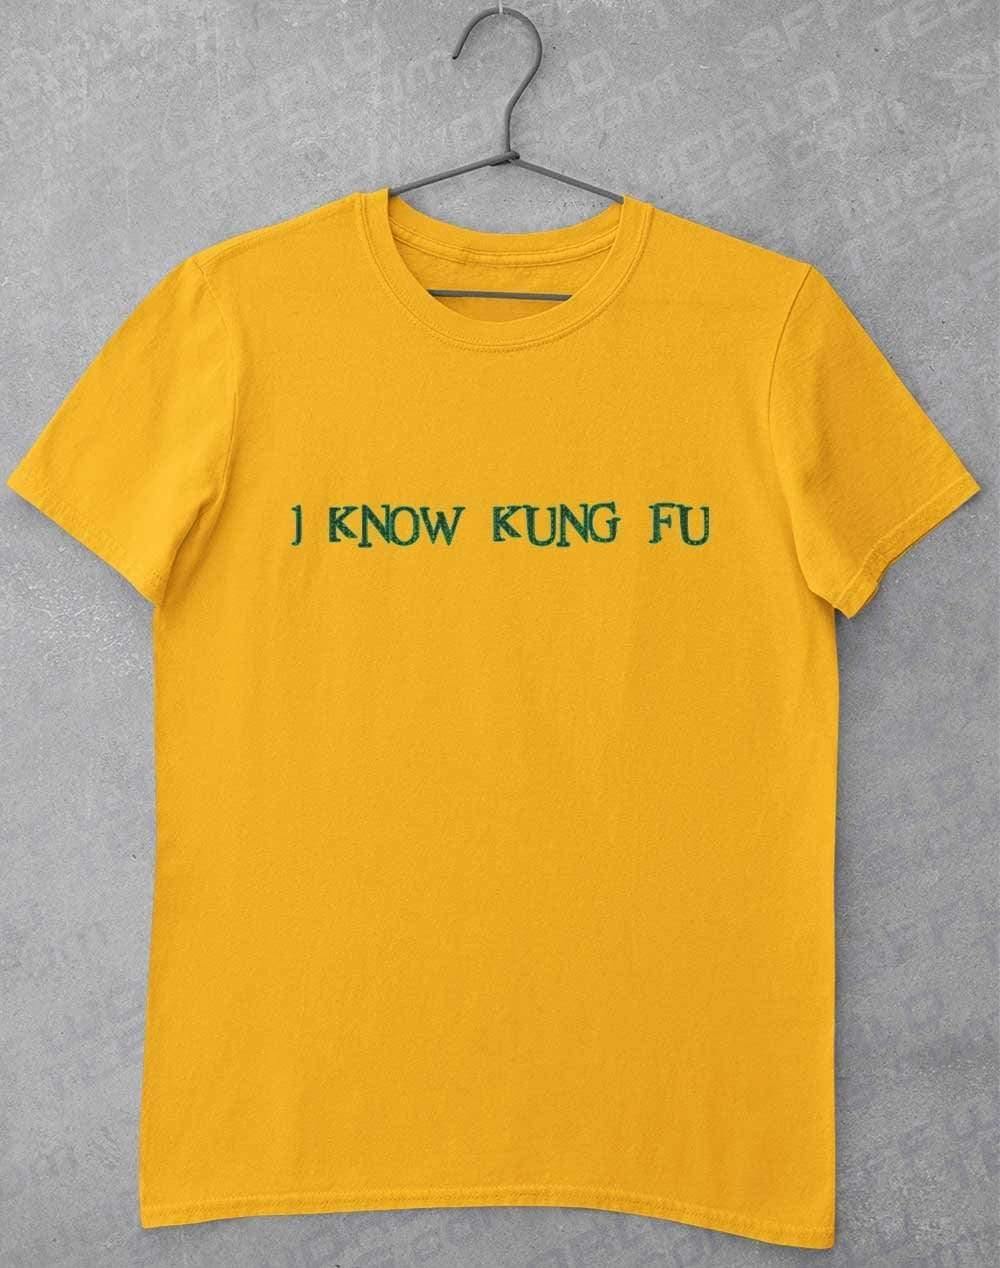 I Know Kung Fu T-Shirt S / Gold  - Off World Tees